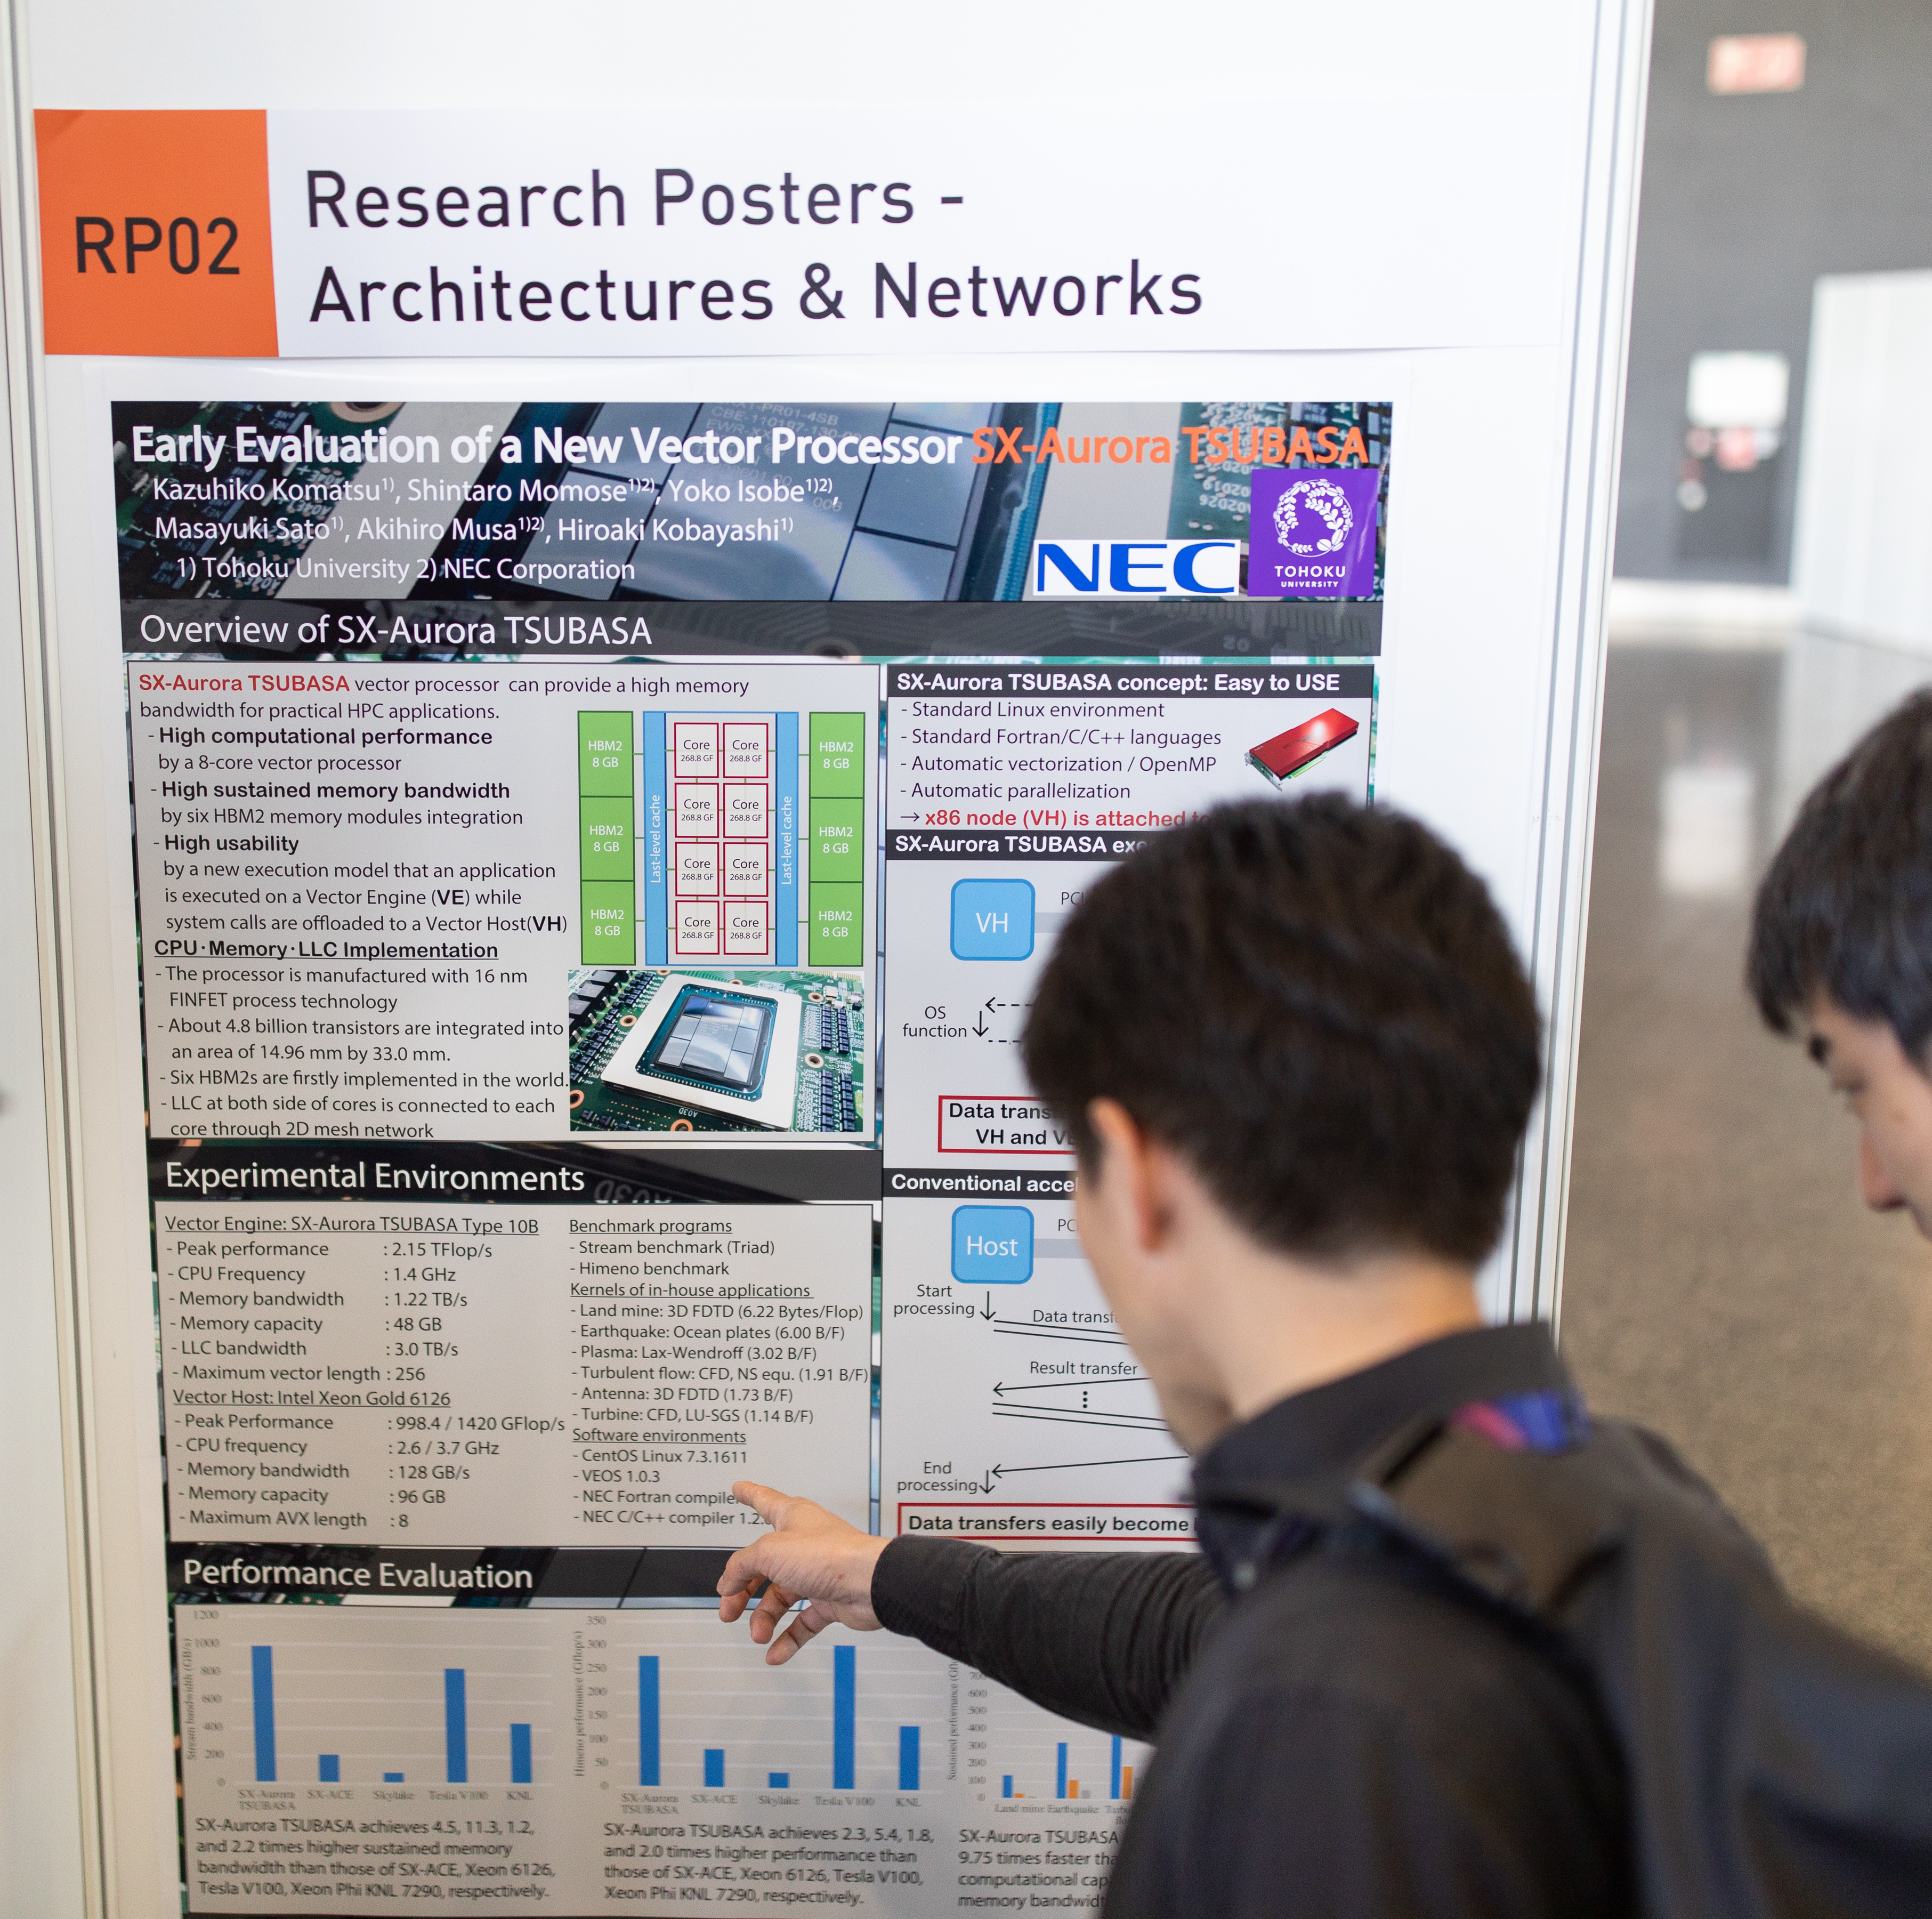 ISC 2019 Research Posters Exhibition